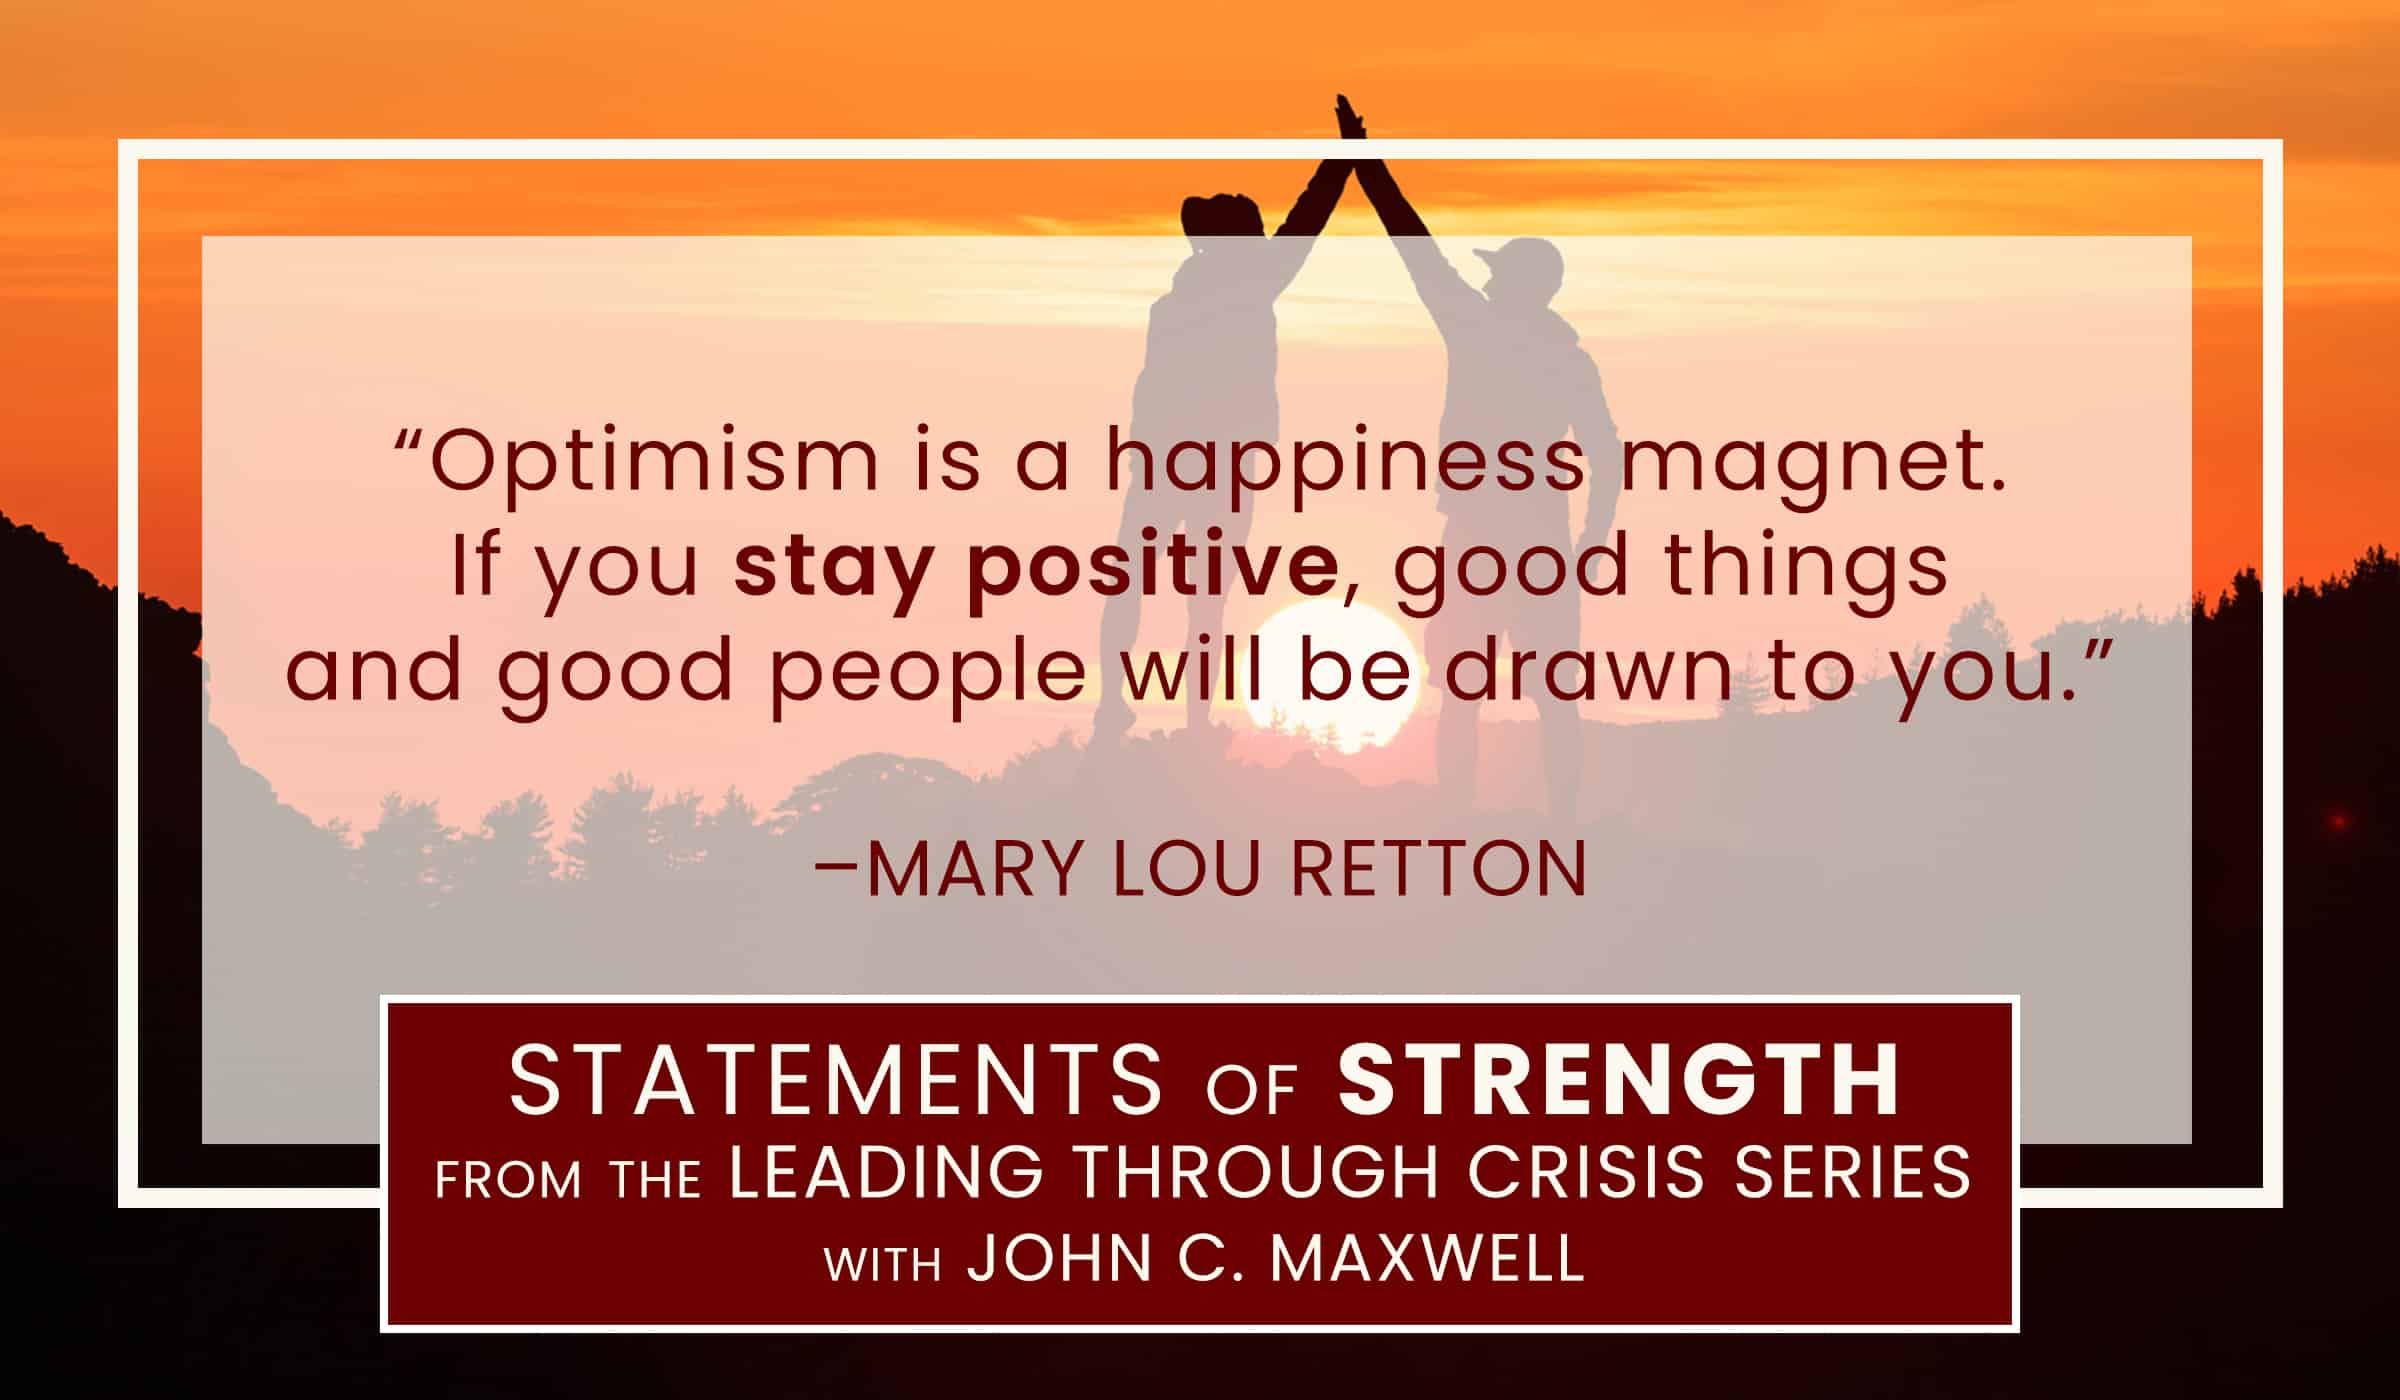 image of quote picture with text quote by mary lou retton